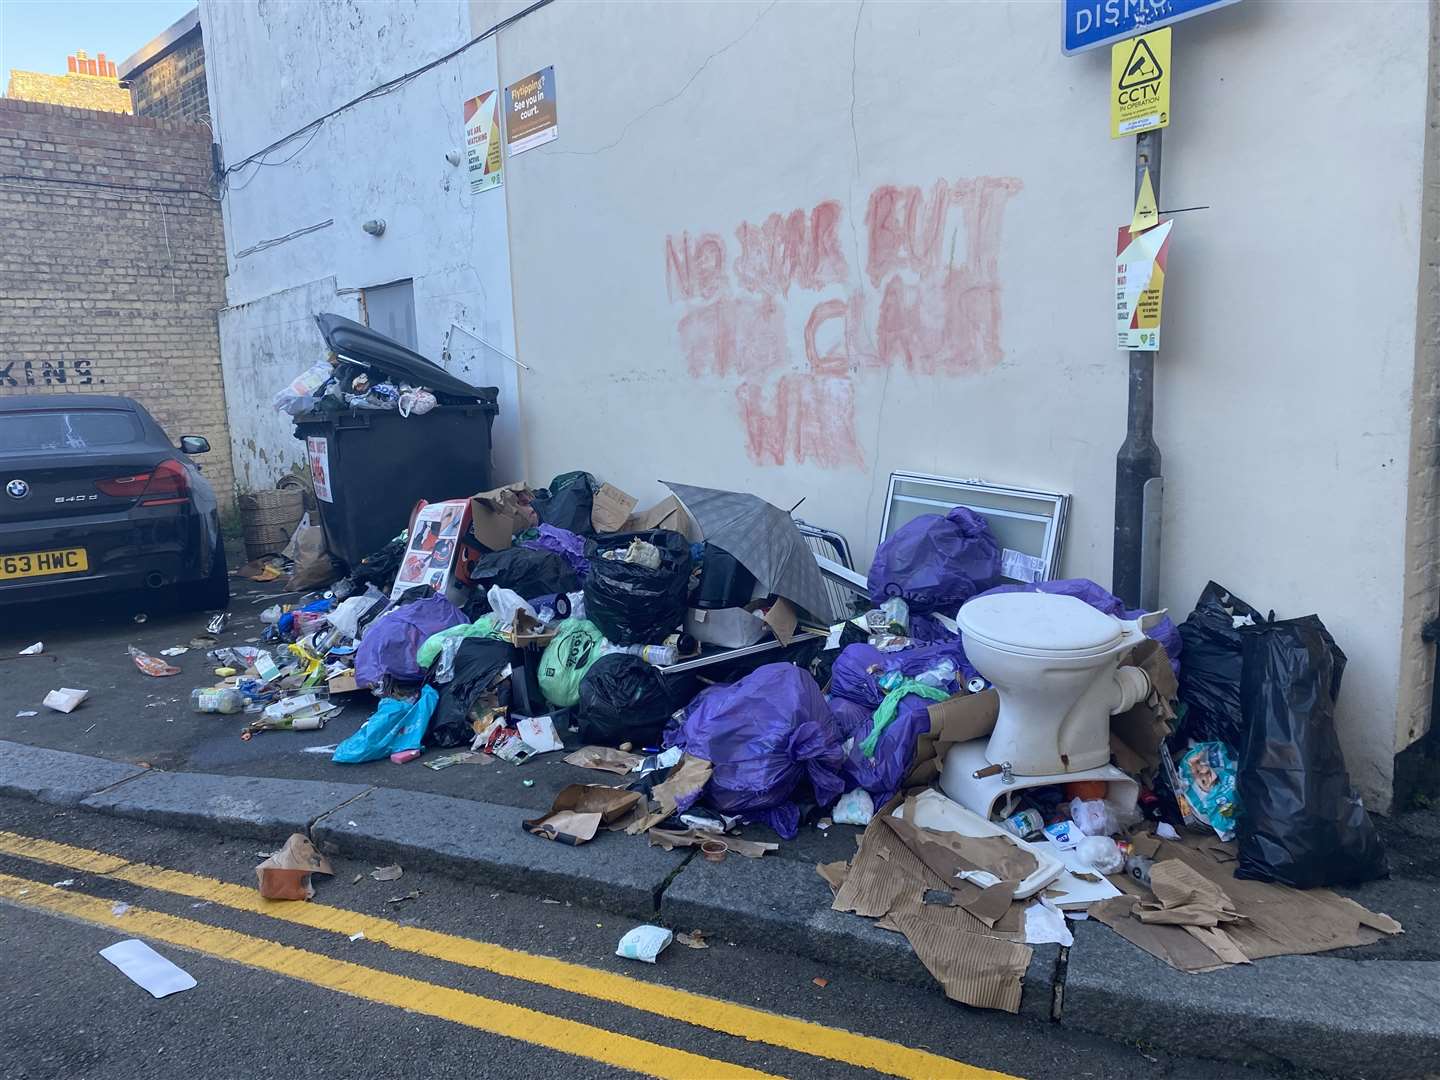 Fly-tipping, over-flowing bins and rubbish in New Street, Dover